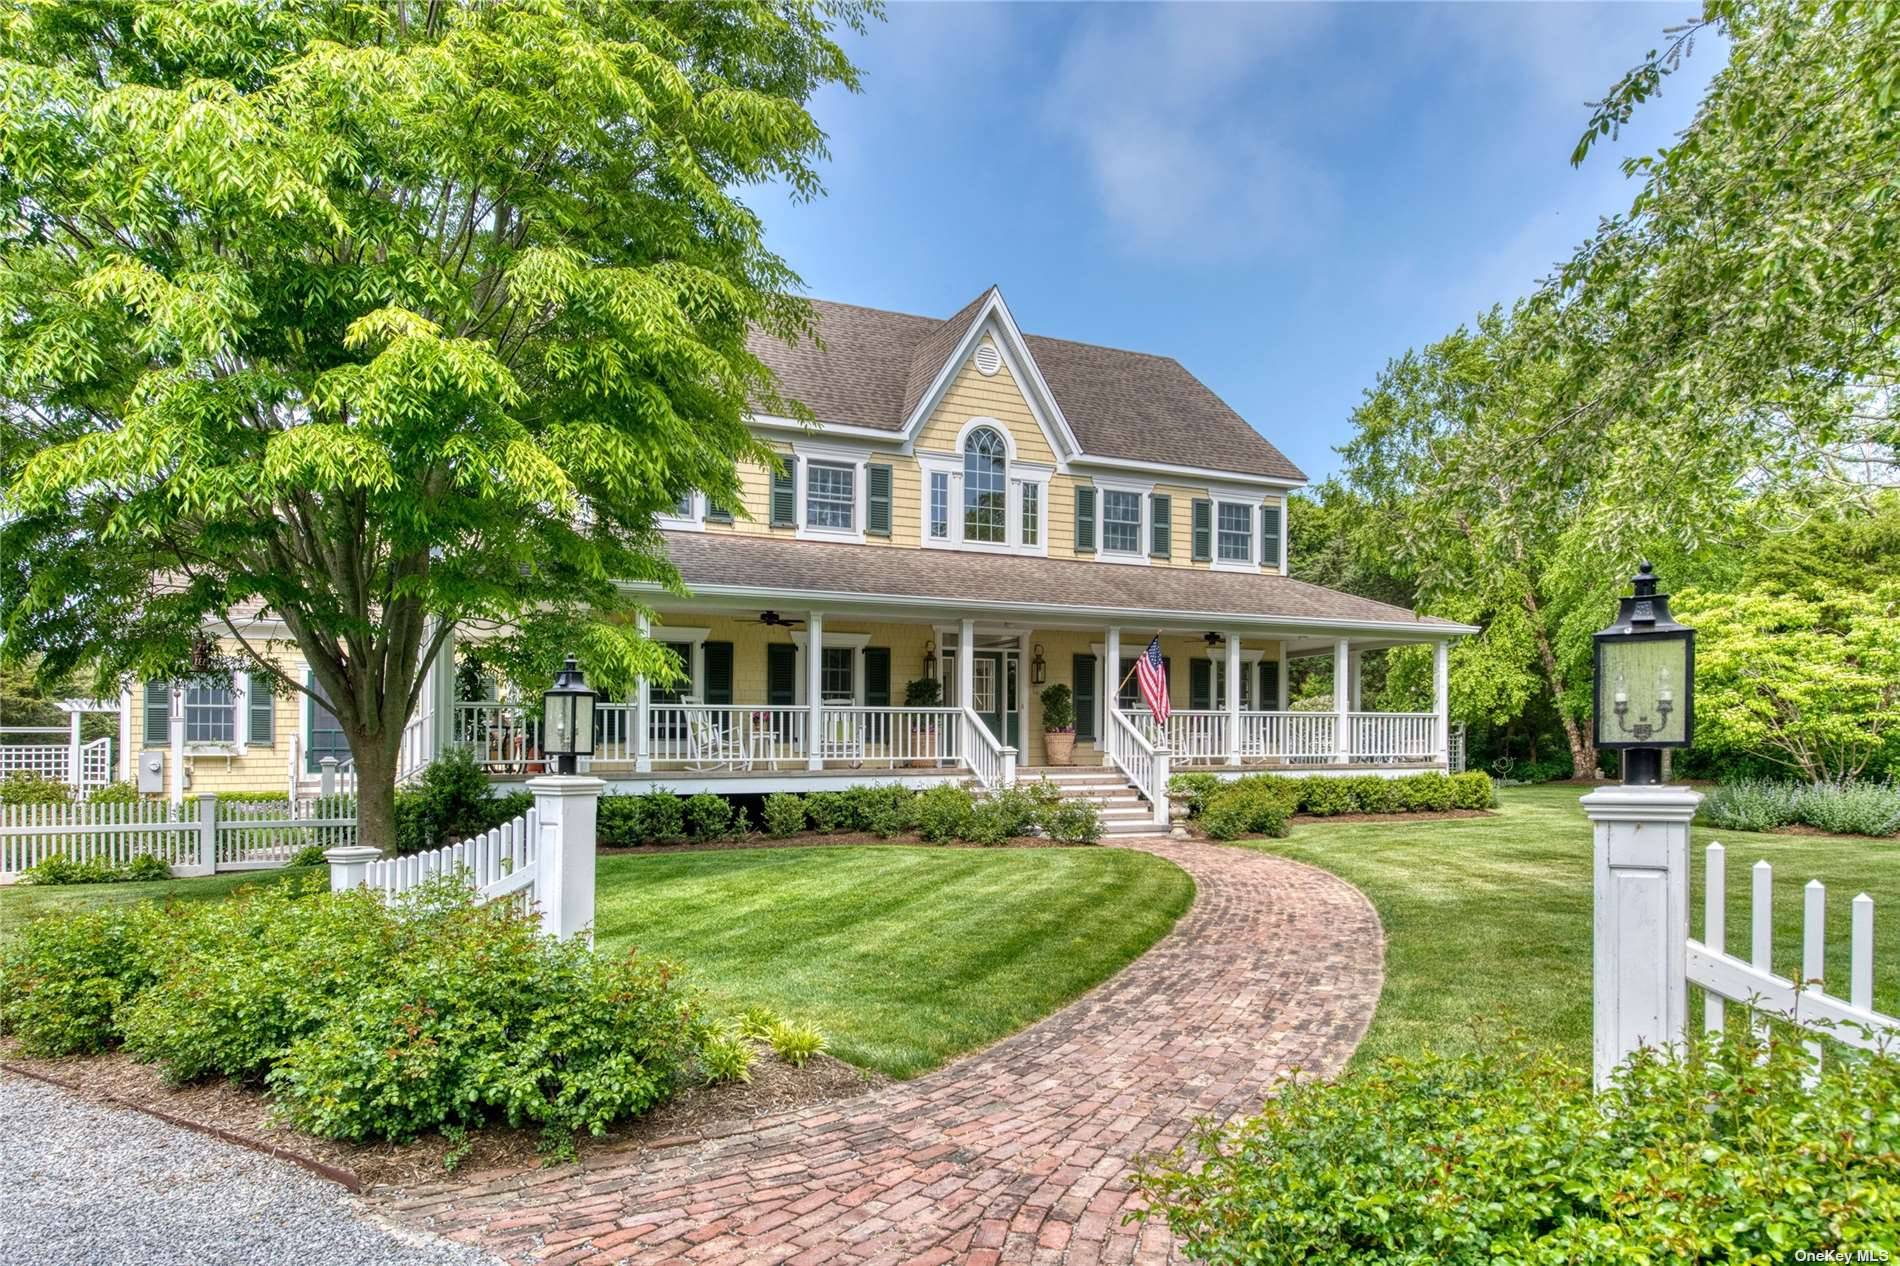 Nested among best wineries, farm stands on the North Fork, exclusive Nassau Point beach, this never before offered custom built modern farmhouse is set back from the rd on a ...